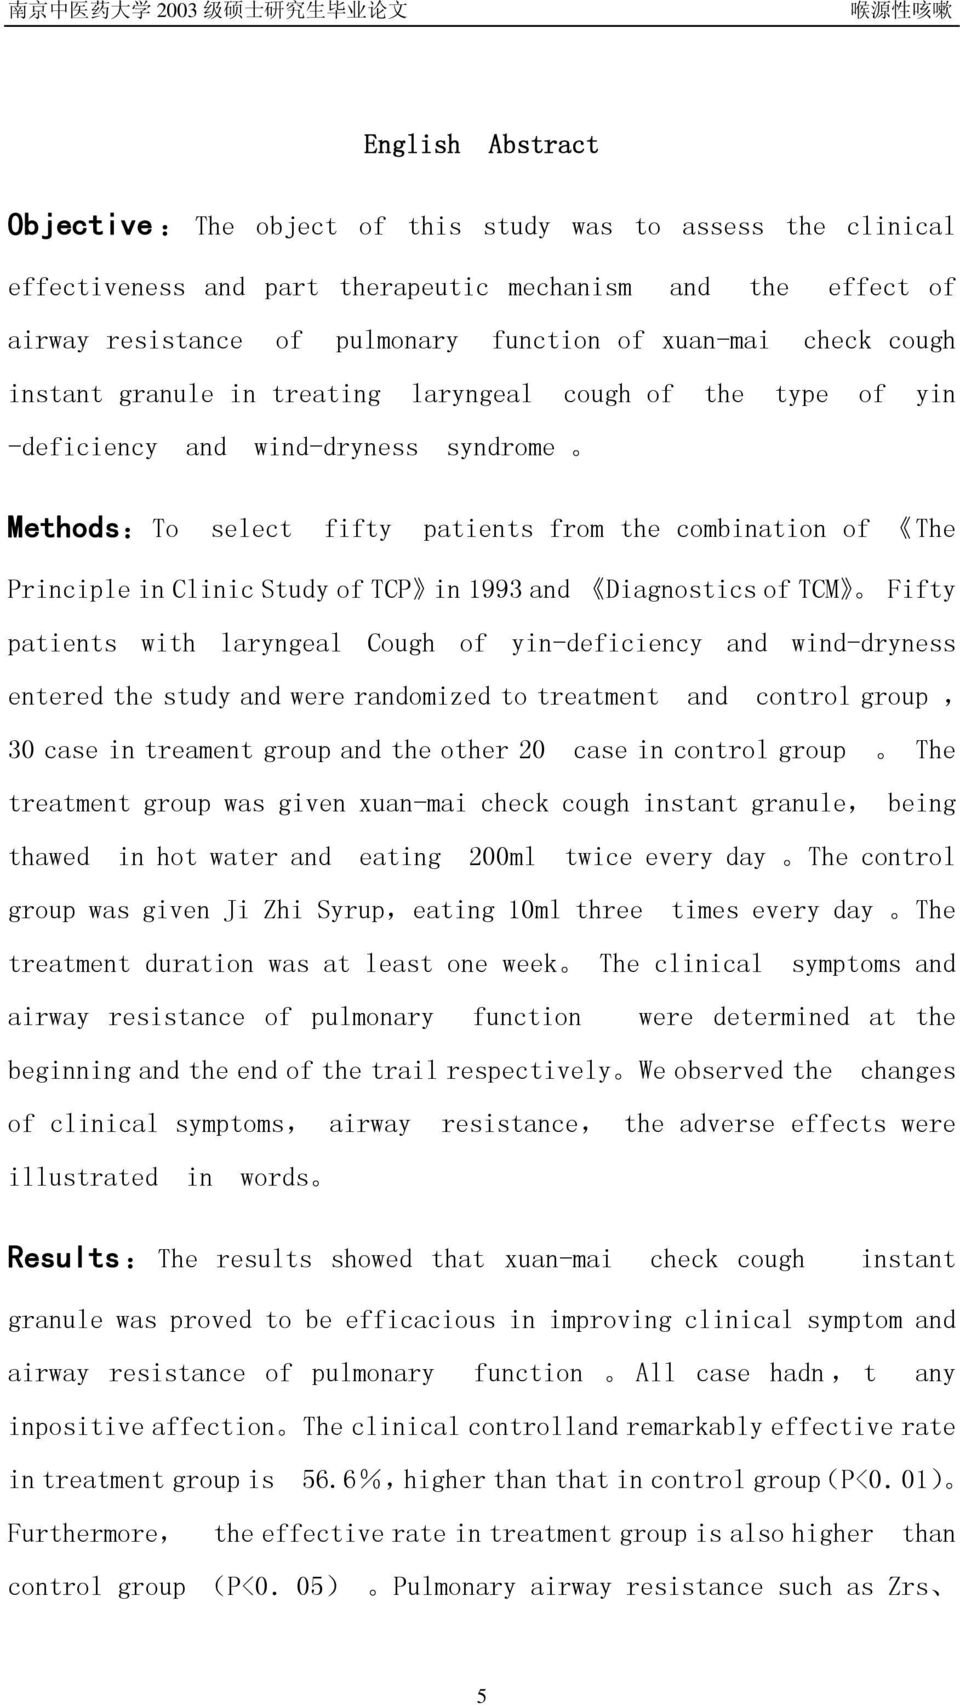 of TCP in 1993 and Diagnostics of TCM Fifty patients with laryngeal Cough of yin-deficiency and wind-dryness entered the study and were randomized to treatment and control group, 30 case in treament